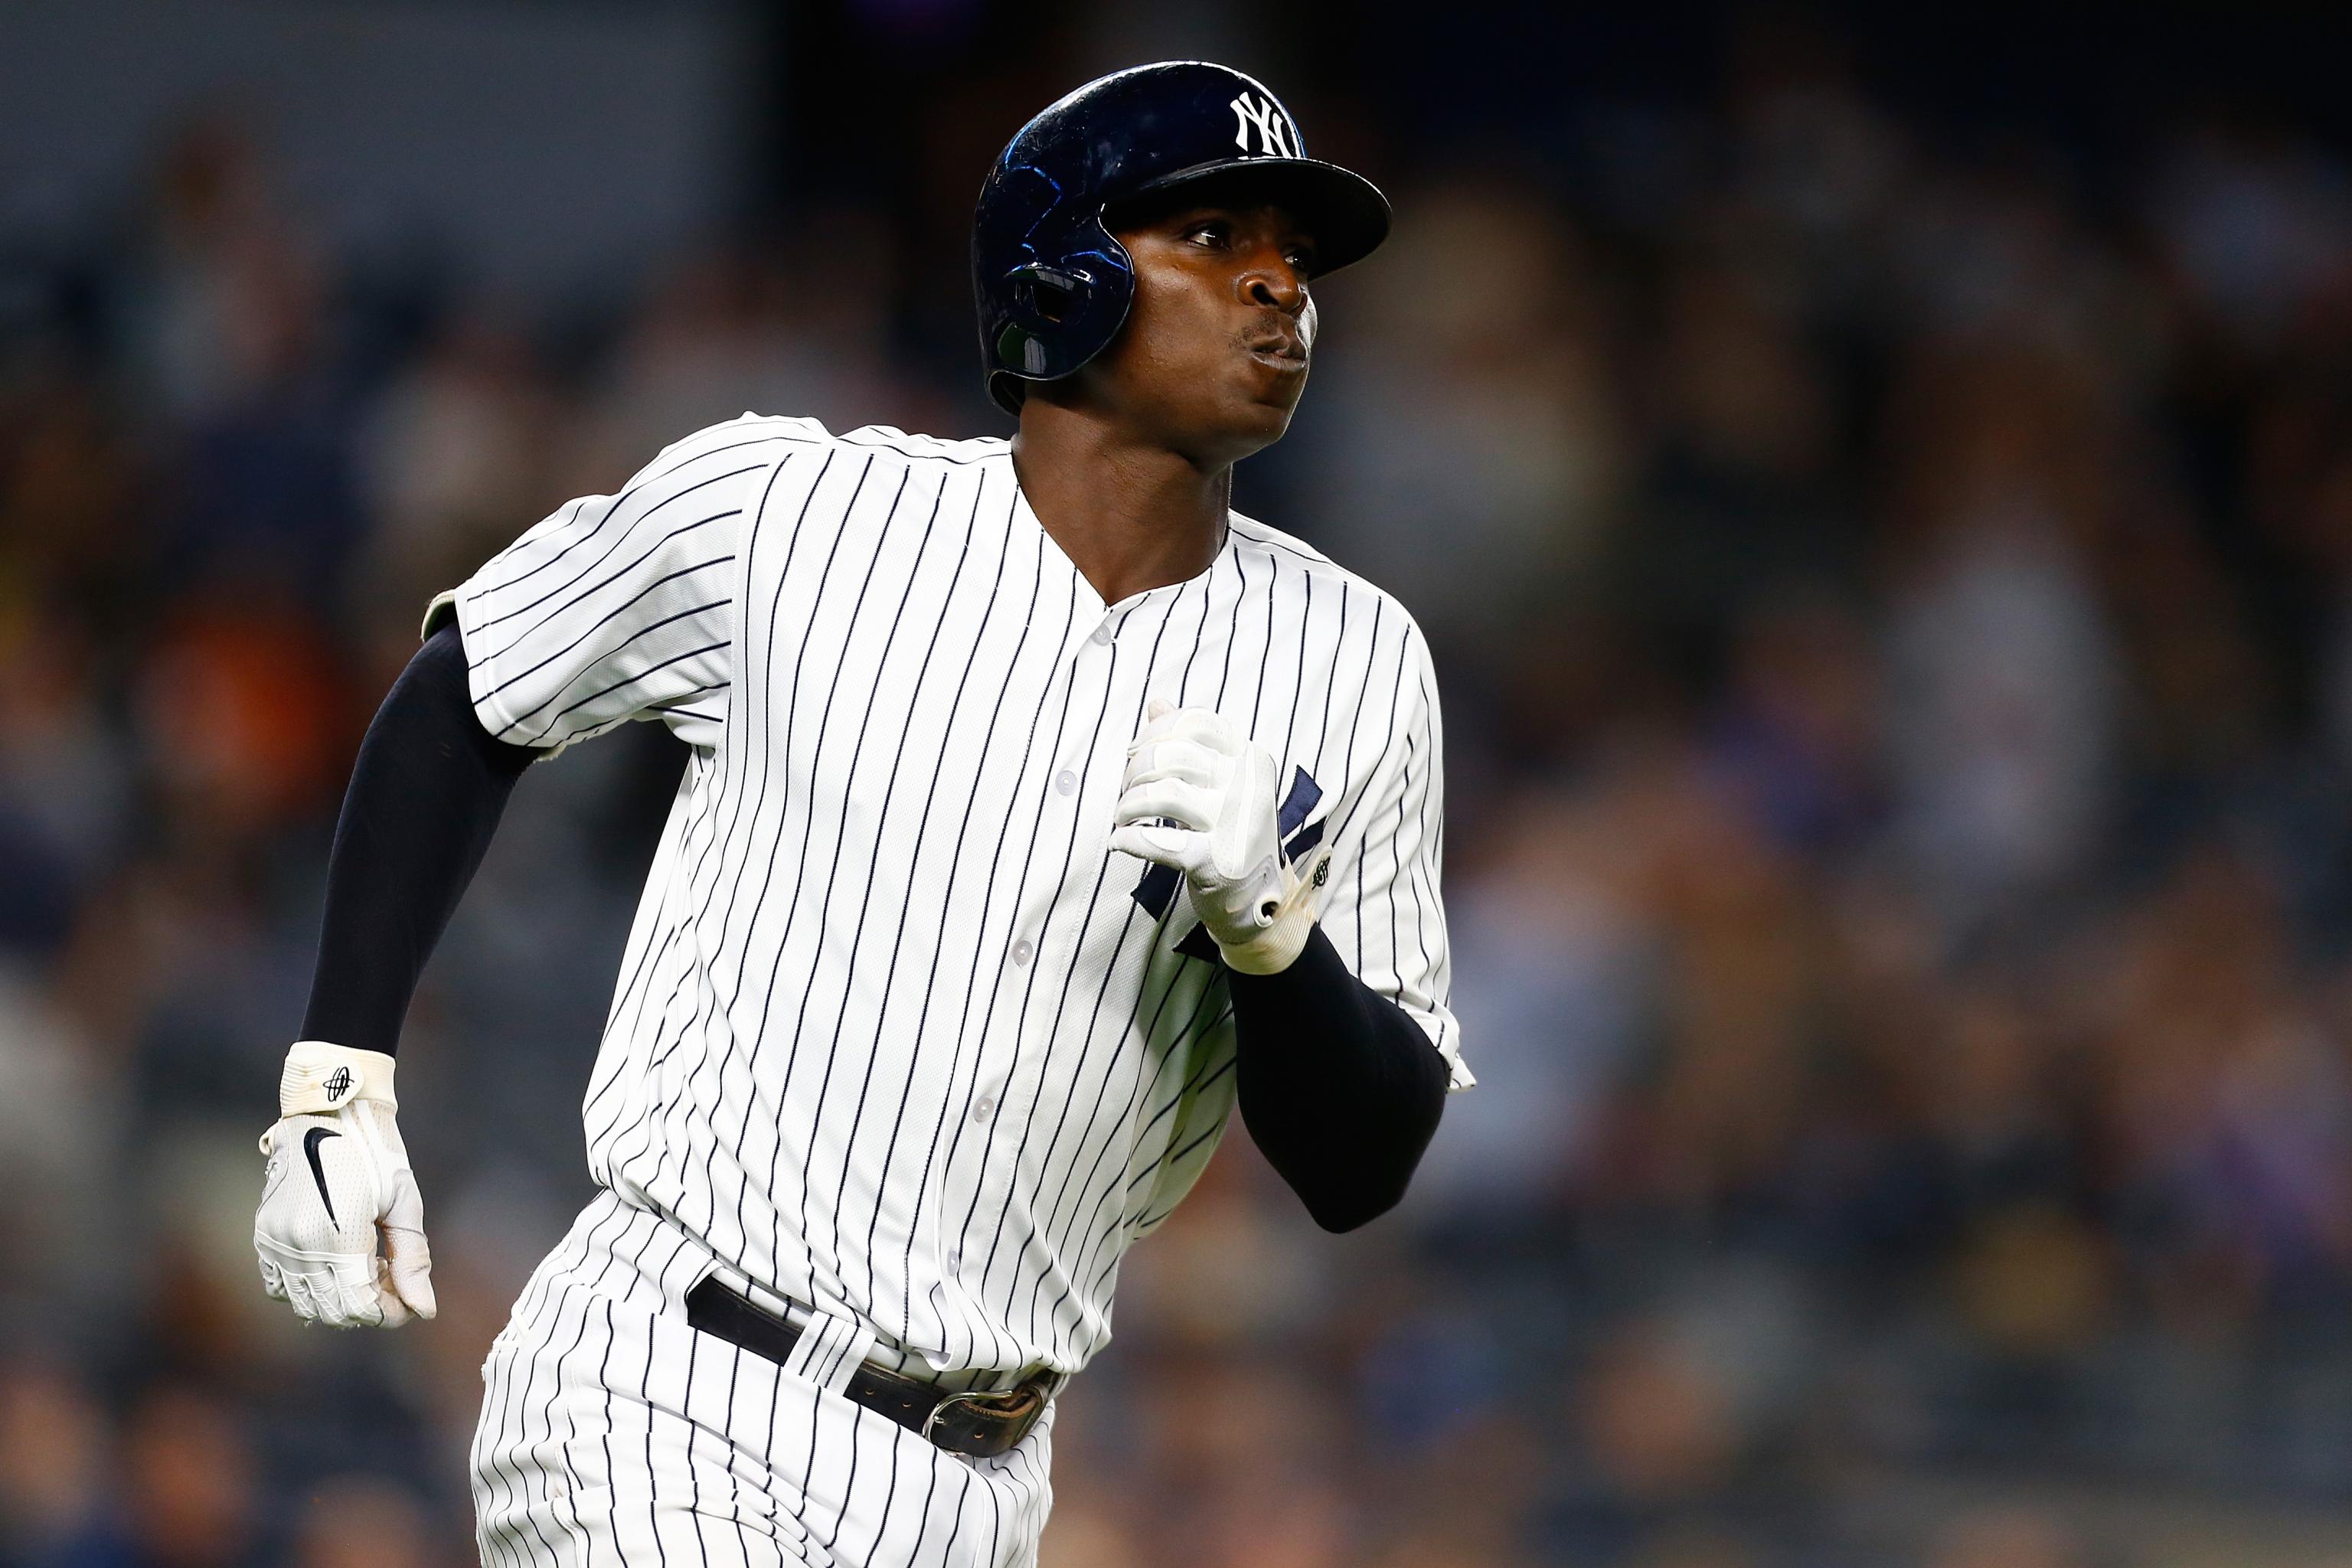 Didi Gregorius back with New York Yankees, cleared to for baseball